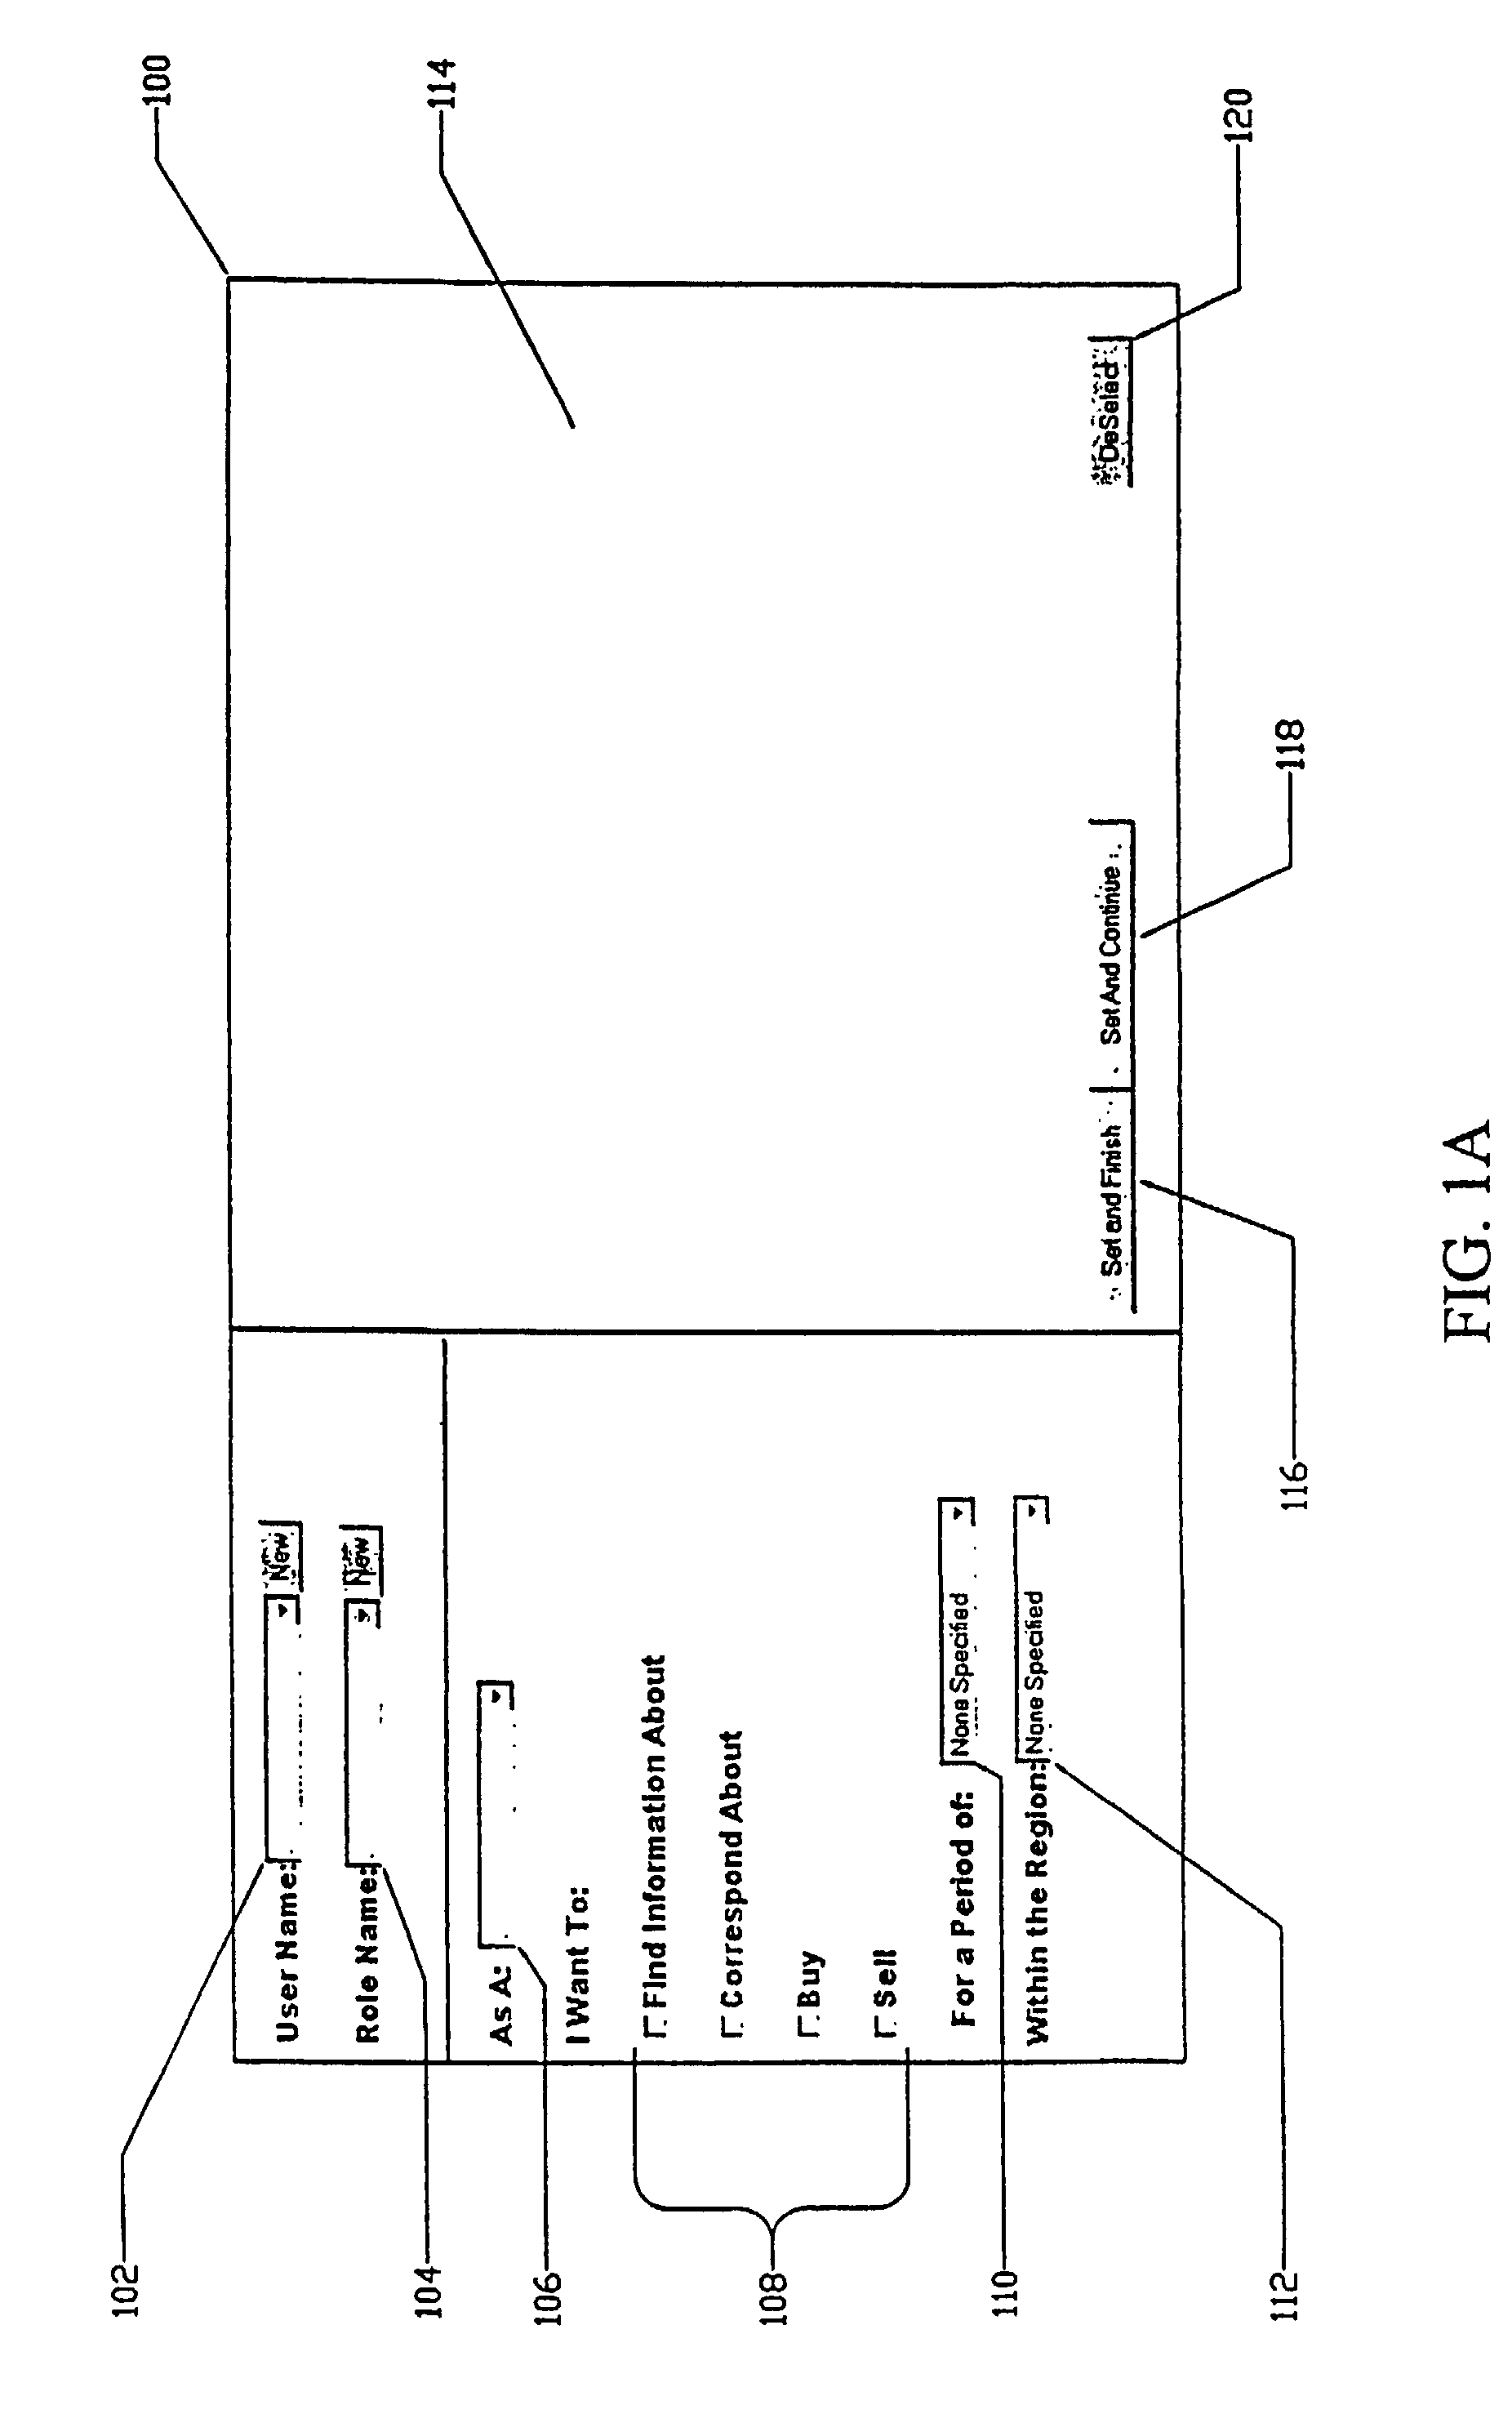 Verbal classification system for the efficient sending and receiving of information